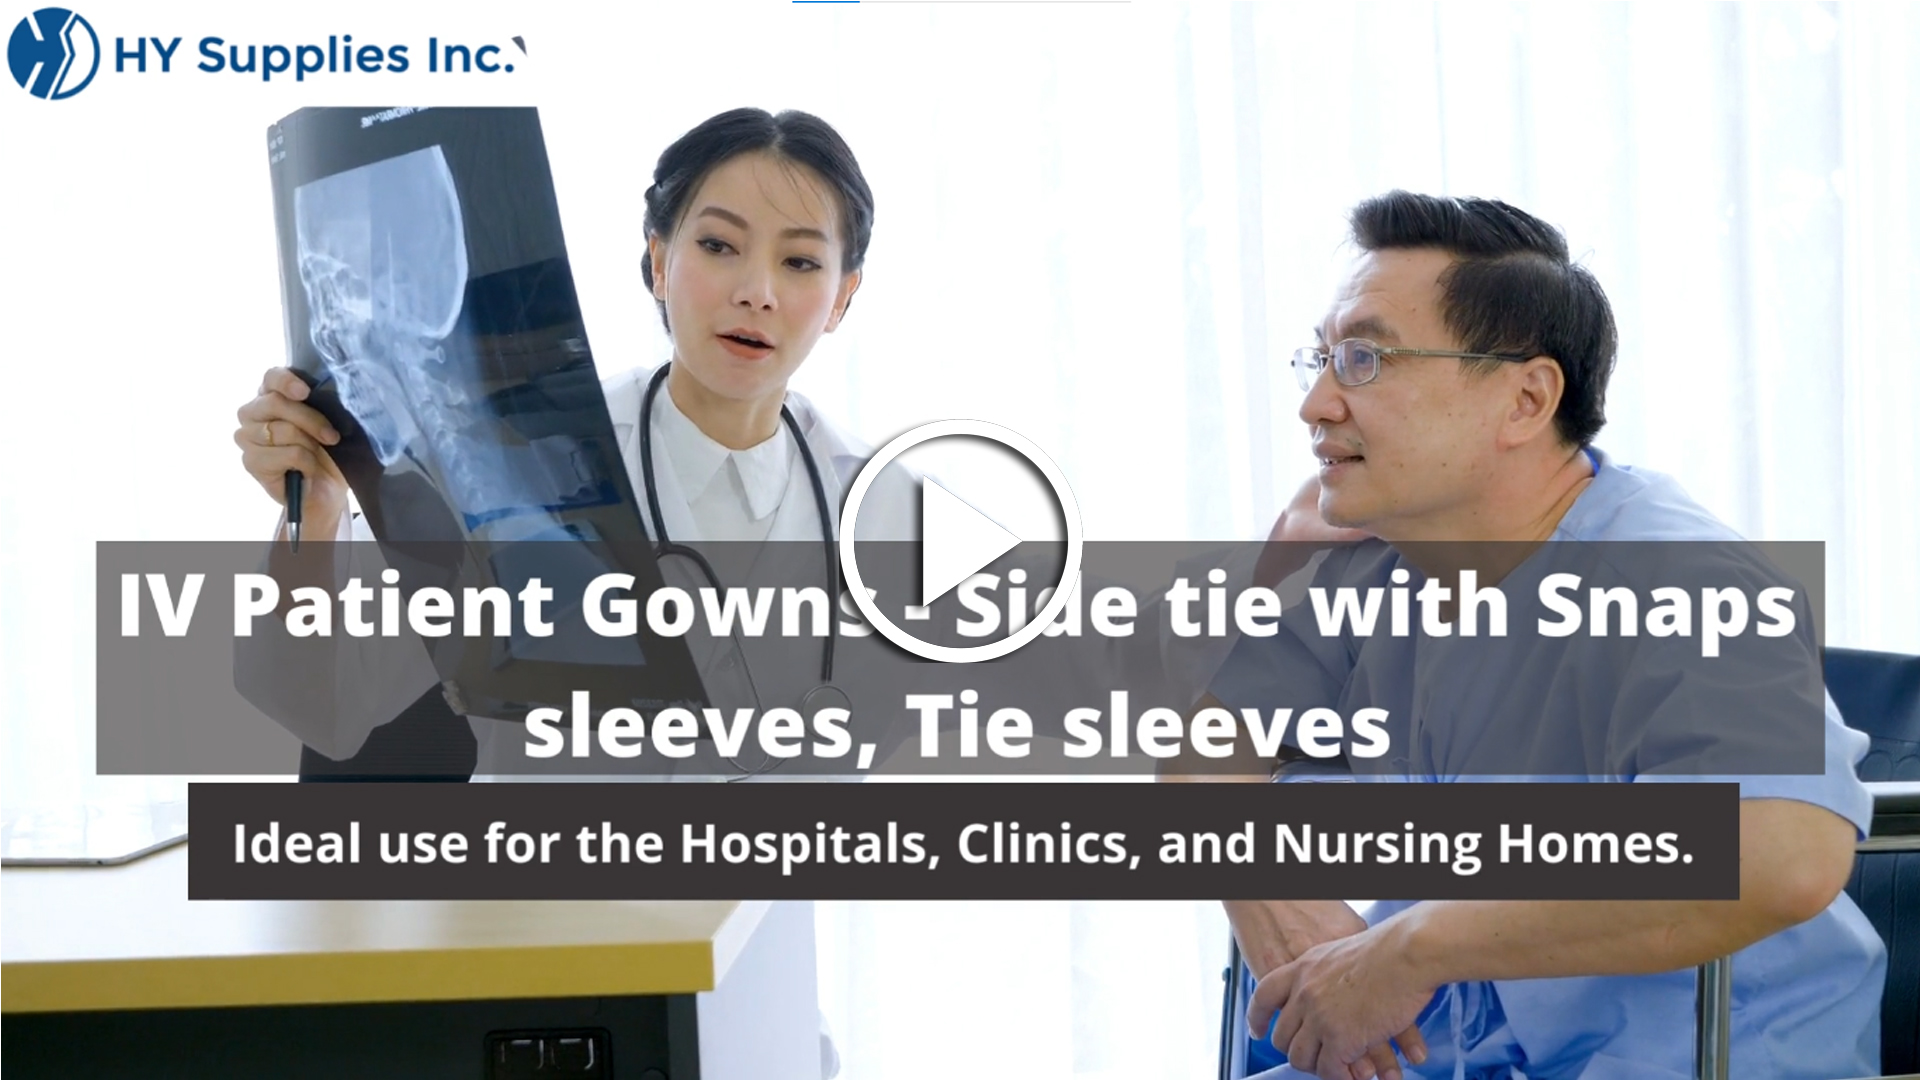 IV Patient Gowns - Side tie with Snaps sleeves, Tie sleeves